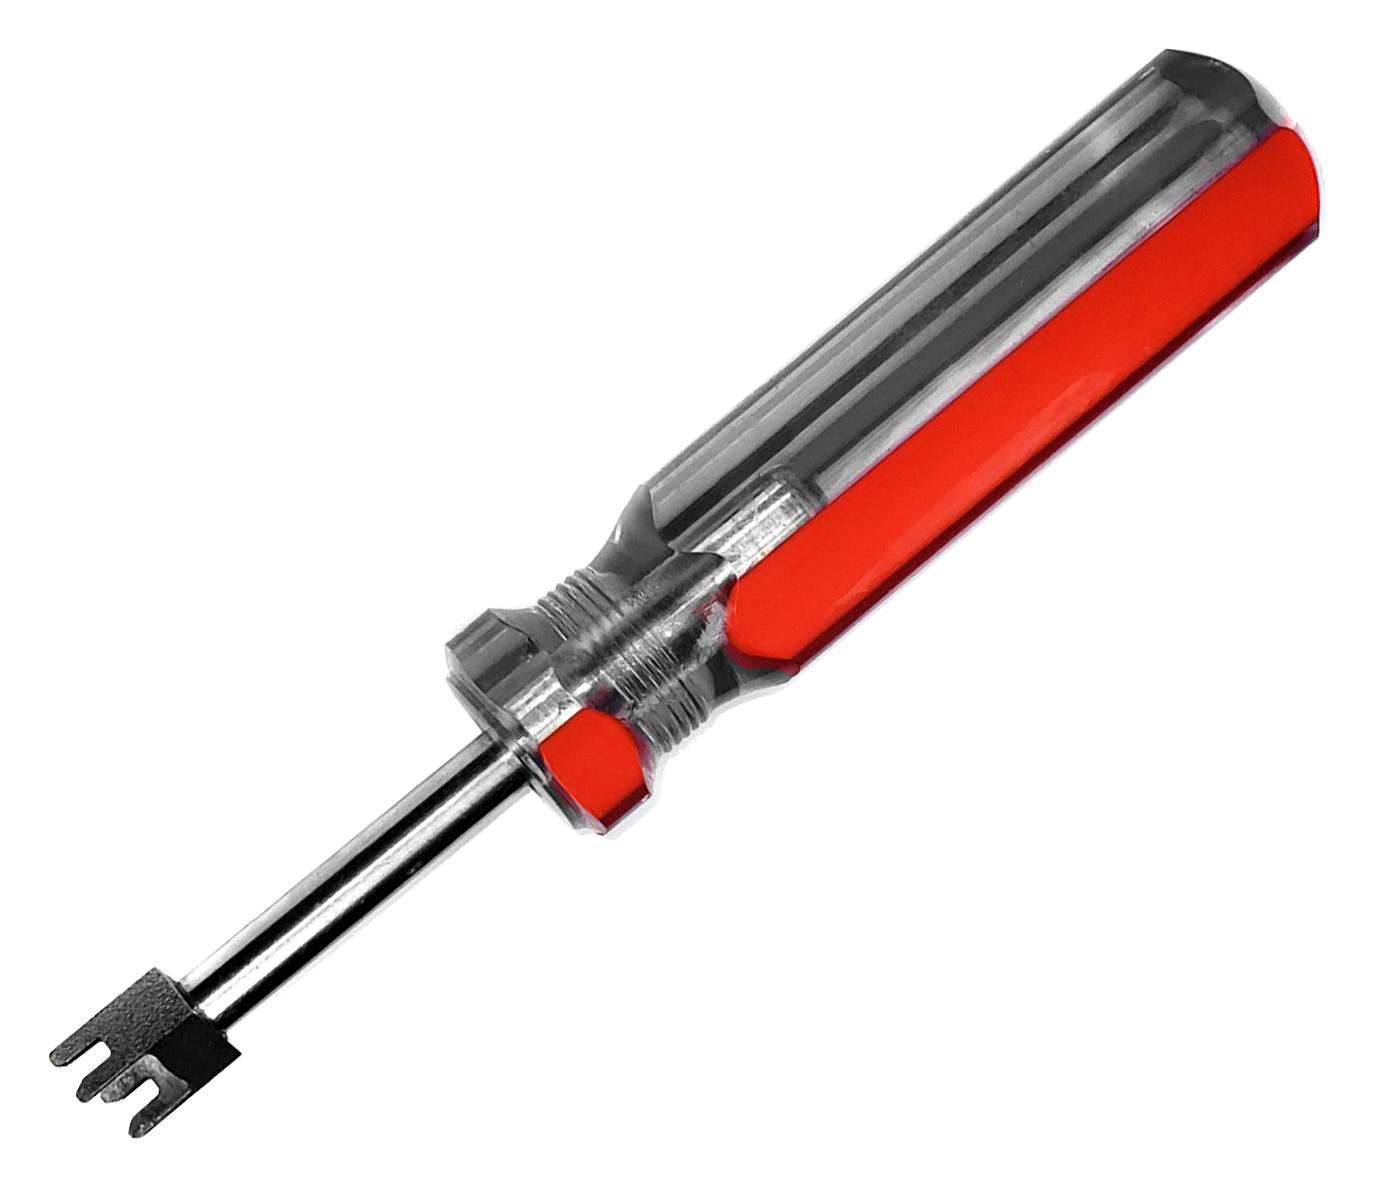 Amphenol Sine/tuchel 50-80639 Extraction Tool, 4mm Contact